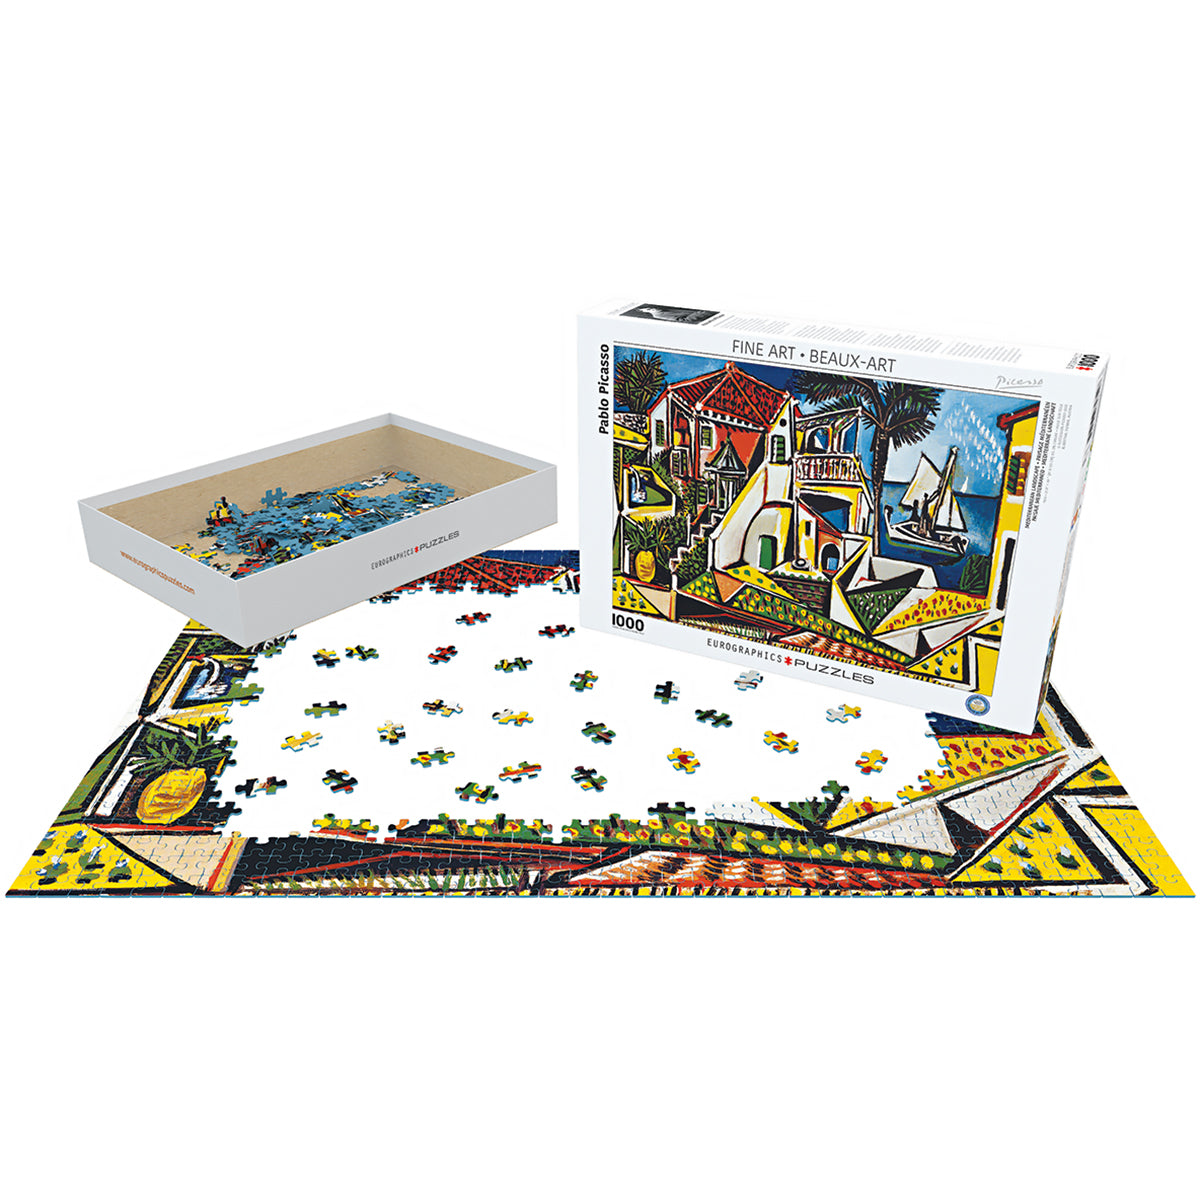 A high-quality jigsaw puzzle showcasing the renowned artwork of Pablo Picasso's Mediterranean Landscape, offering hours of engaging and meditative puzzling.